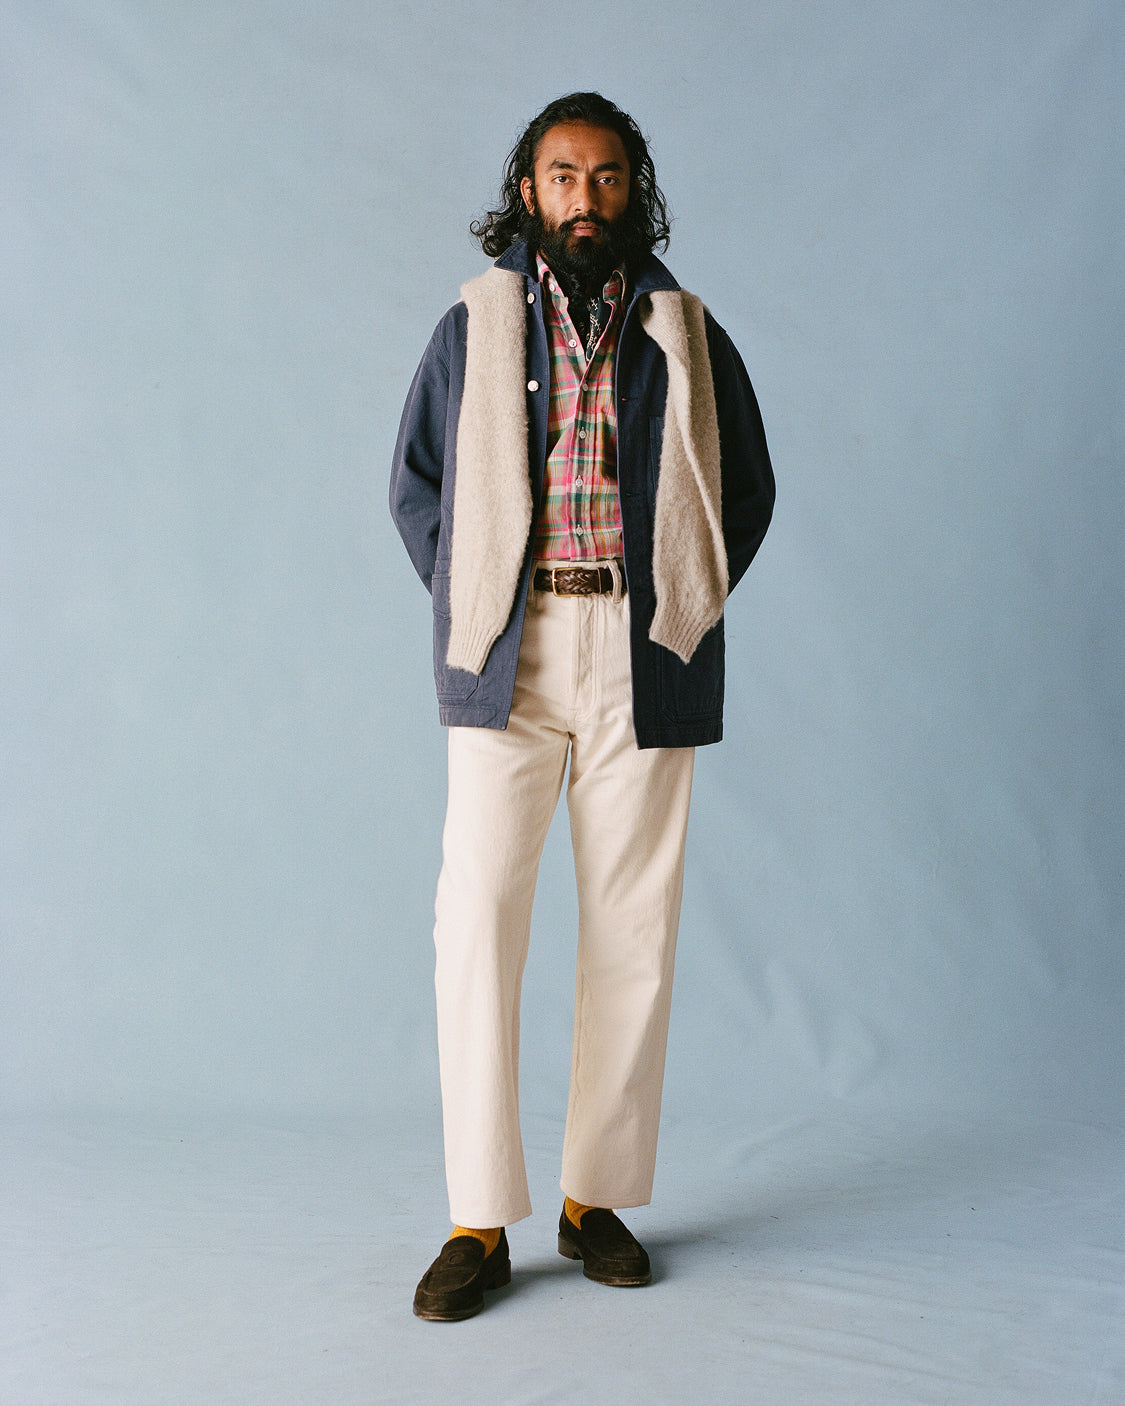 The Transitional Lookbook – Drakes